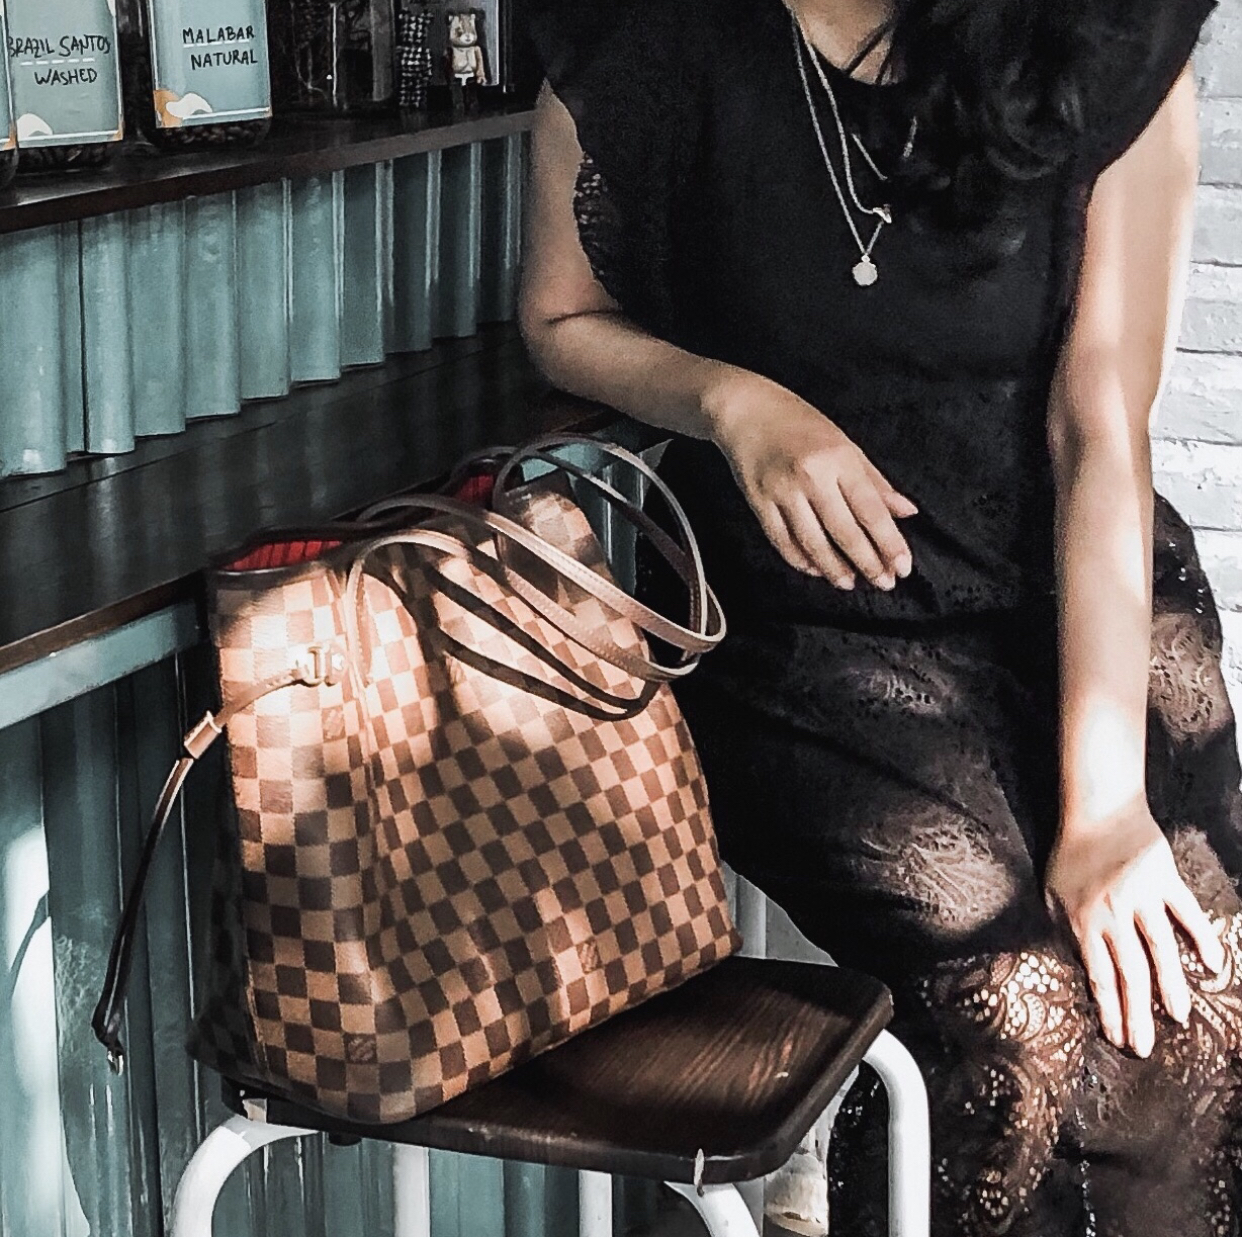 Neverfull MM » Rent The Louis Vuitton Handbag of Your Dreams